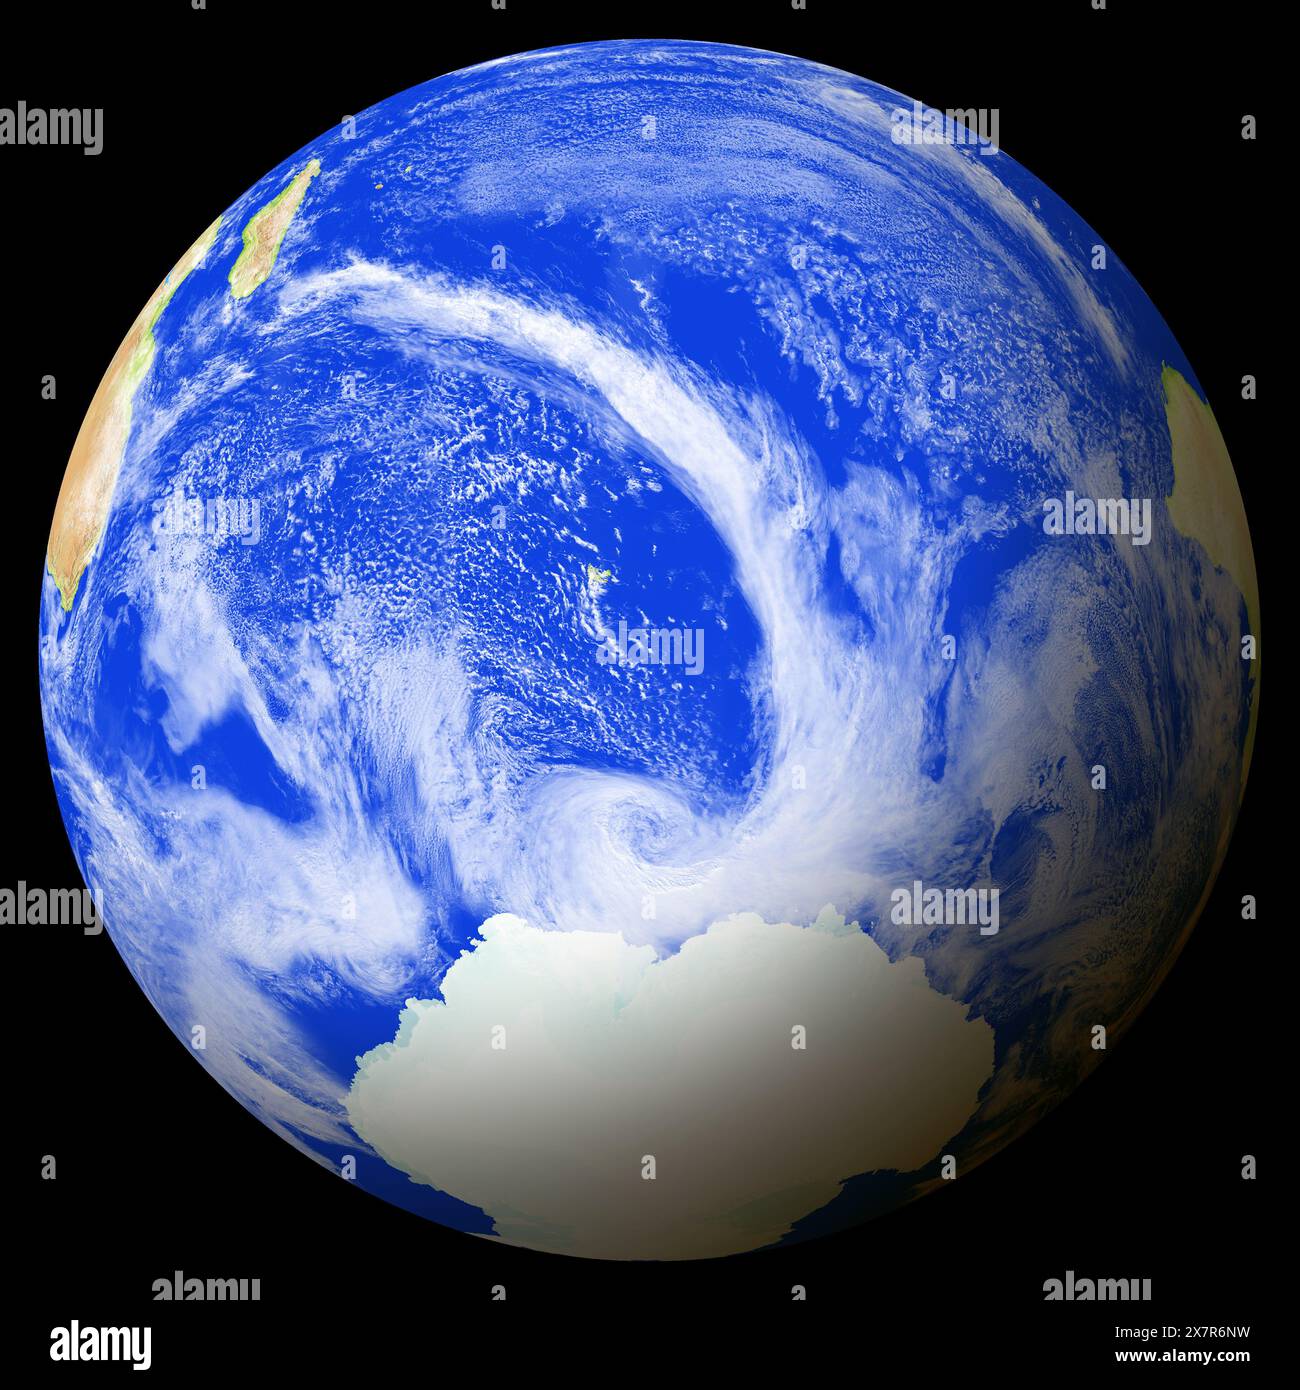 View of the earth from space showing Heard Island and McDonald Islands in the center of the image. Stock Photo